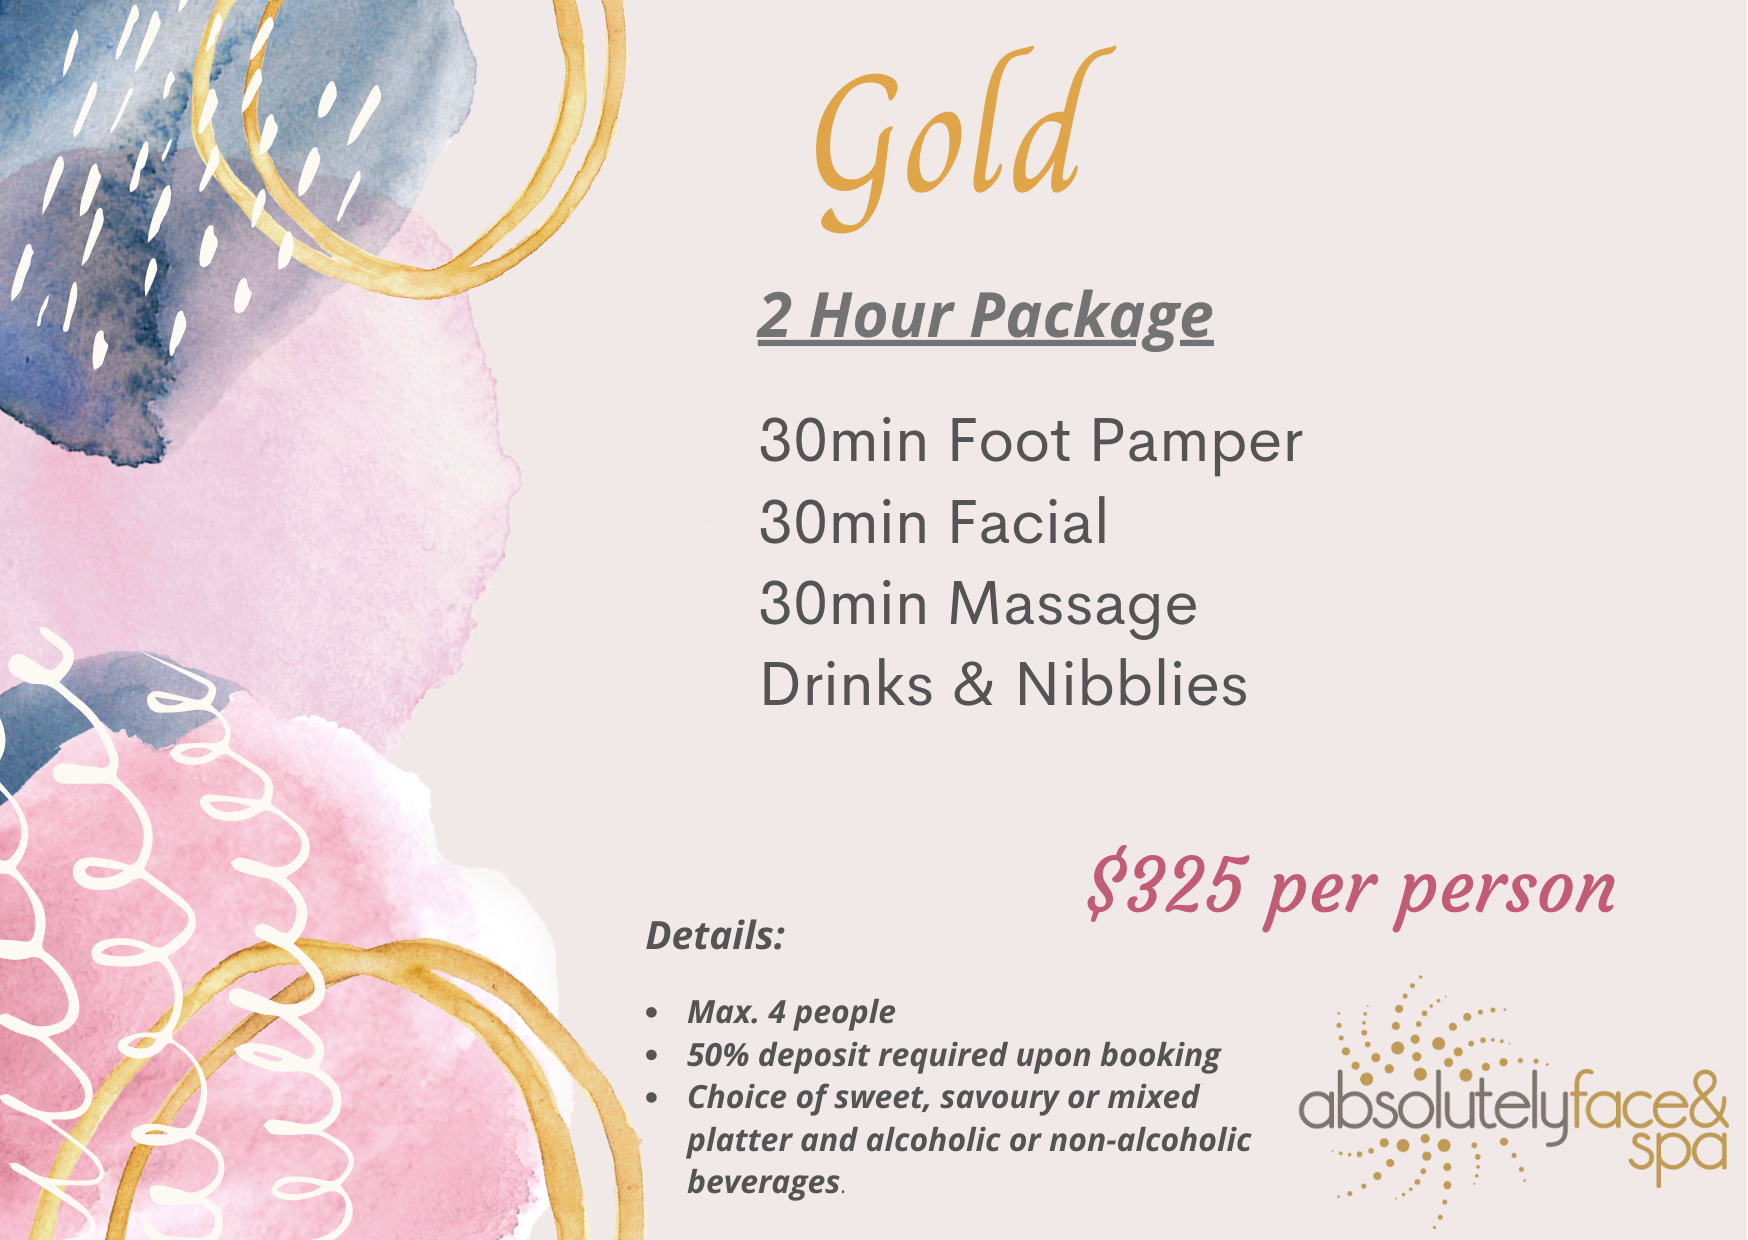 Group And Hens Pamper Packages — Absolutely Face And Spa